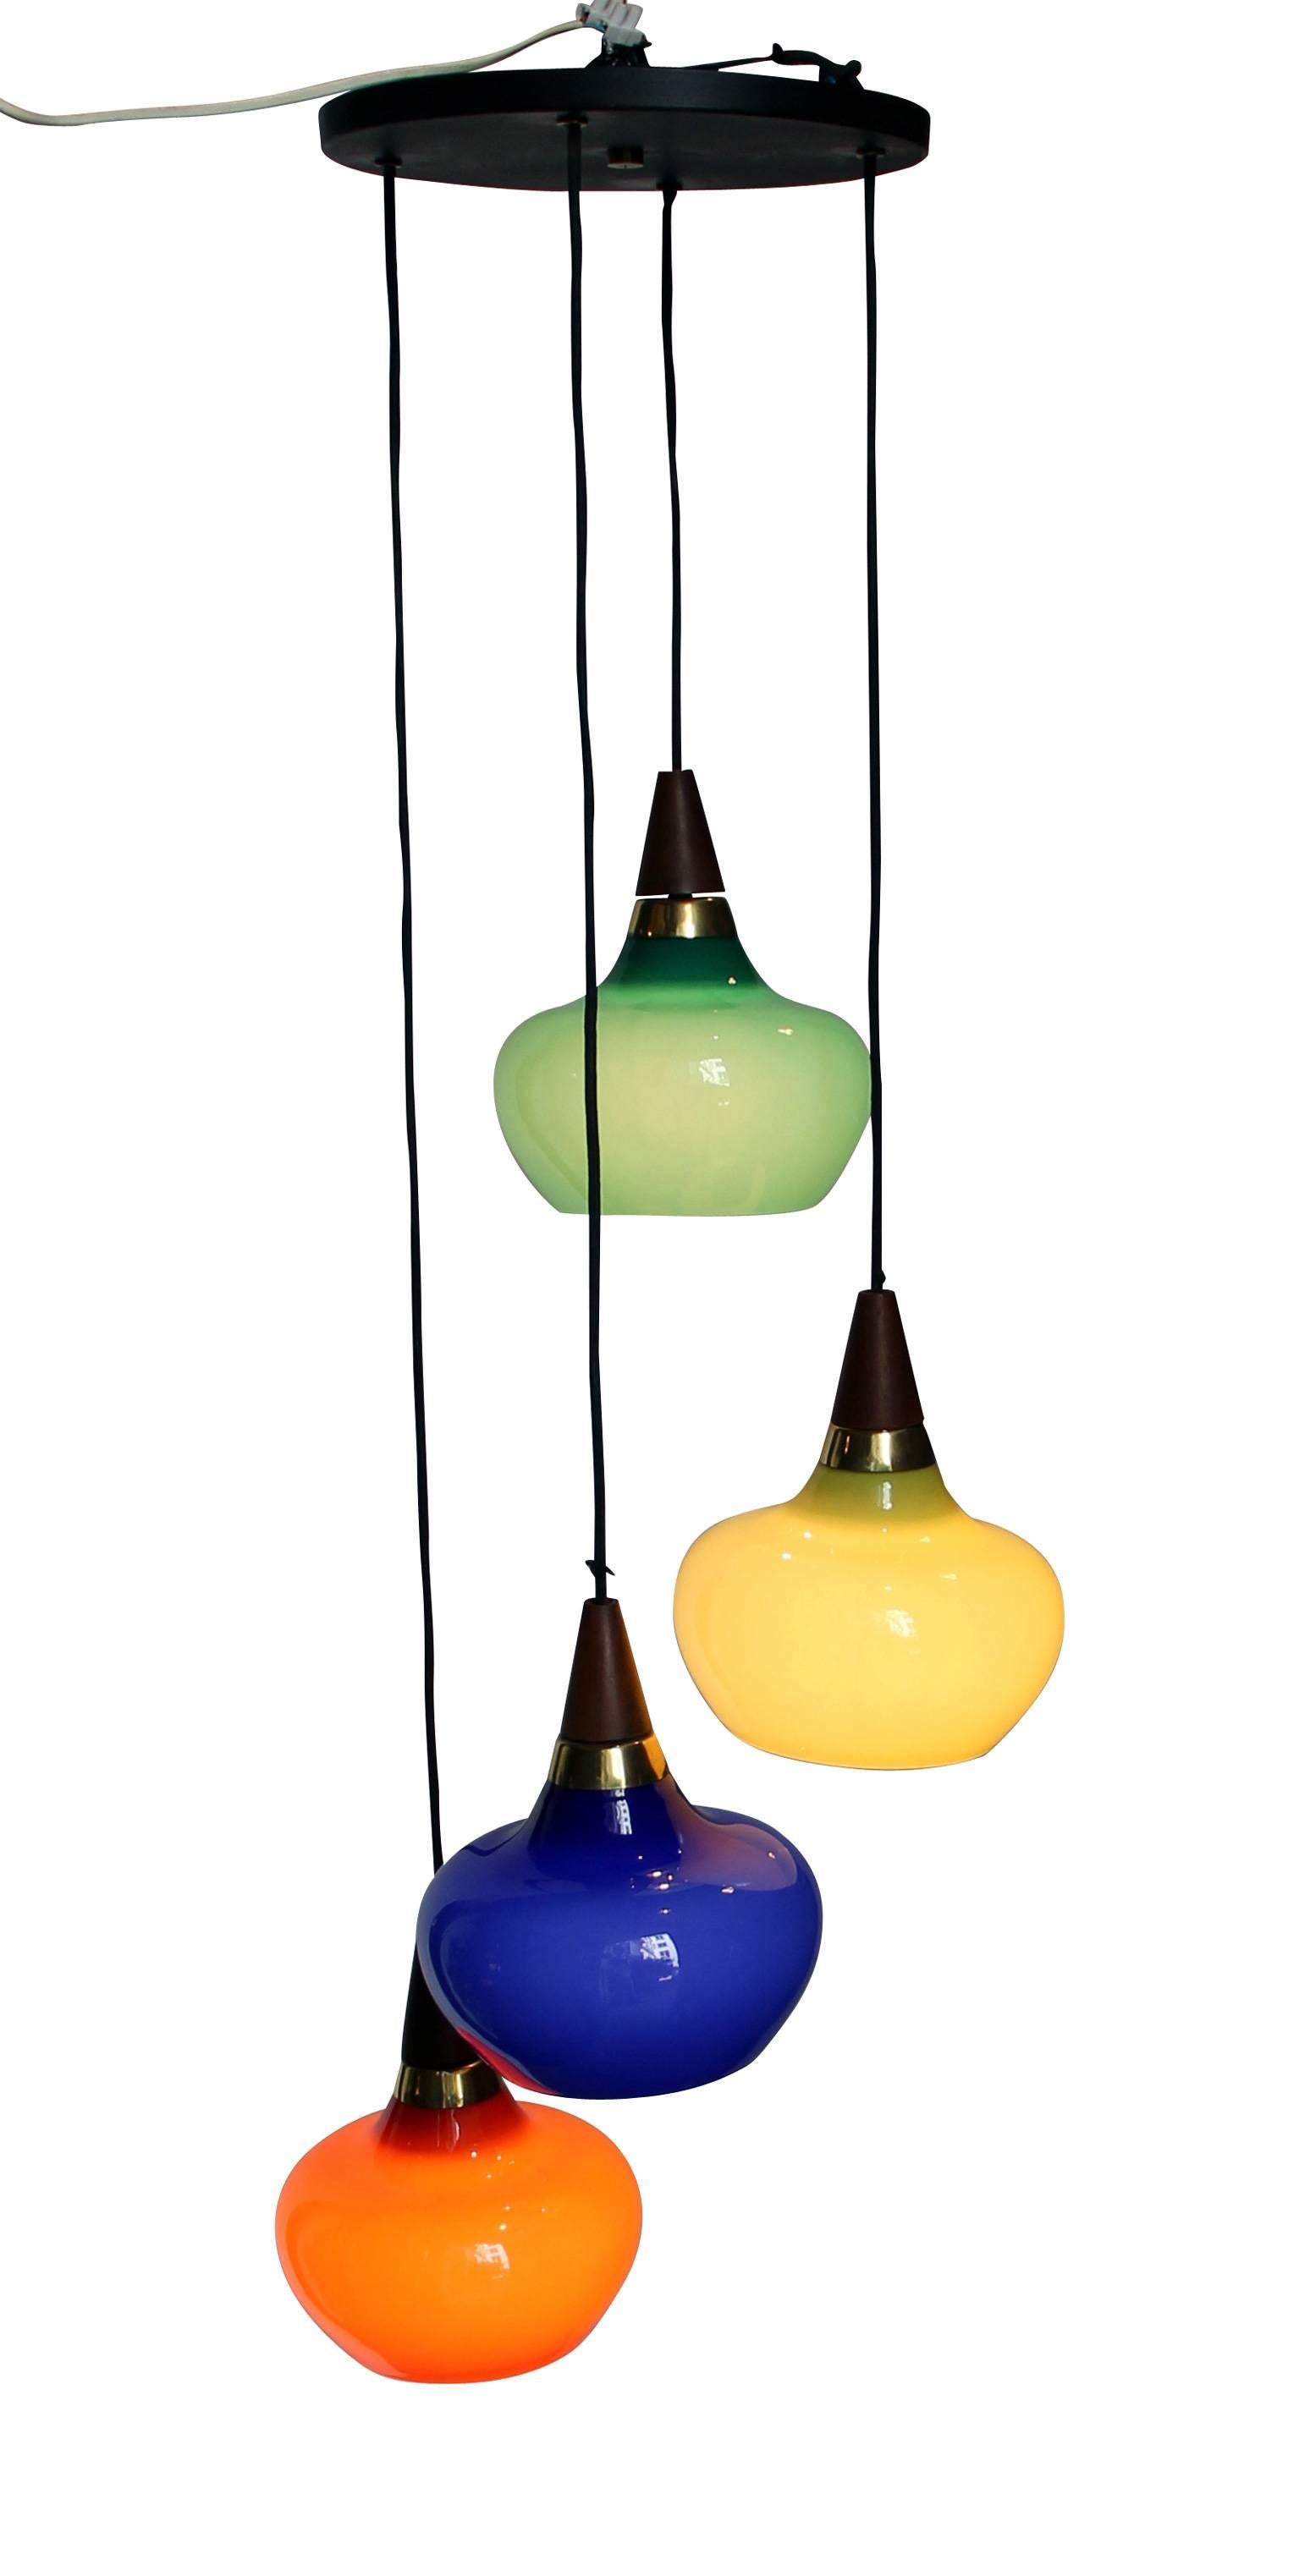 Interesting 1950s suspension in colored glass, wood and metal. In good original condition.